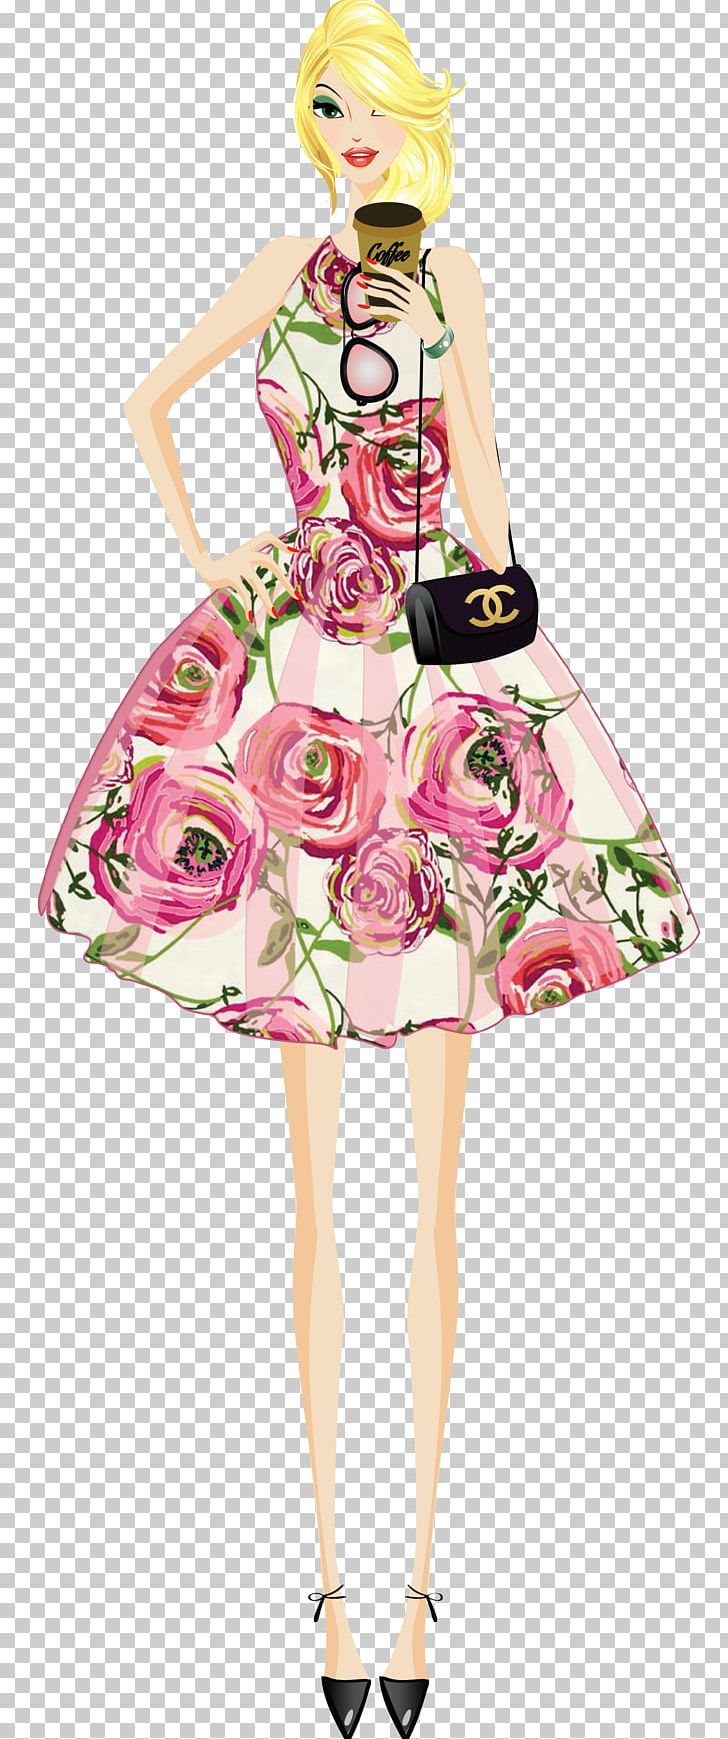 Chanel Fashion Design Perfume PNG, Clipart, Art, Bag, Barbie, Chanel, Chanel Lipstick Free PNG Download